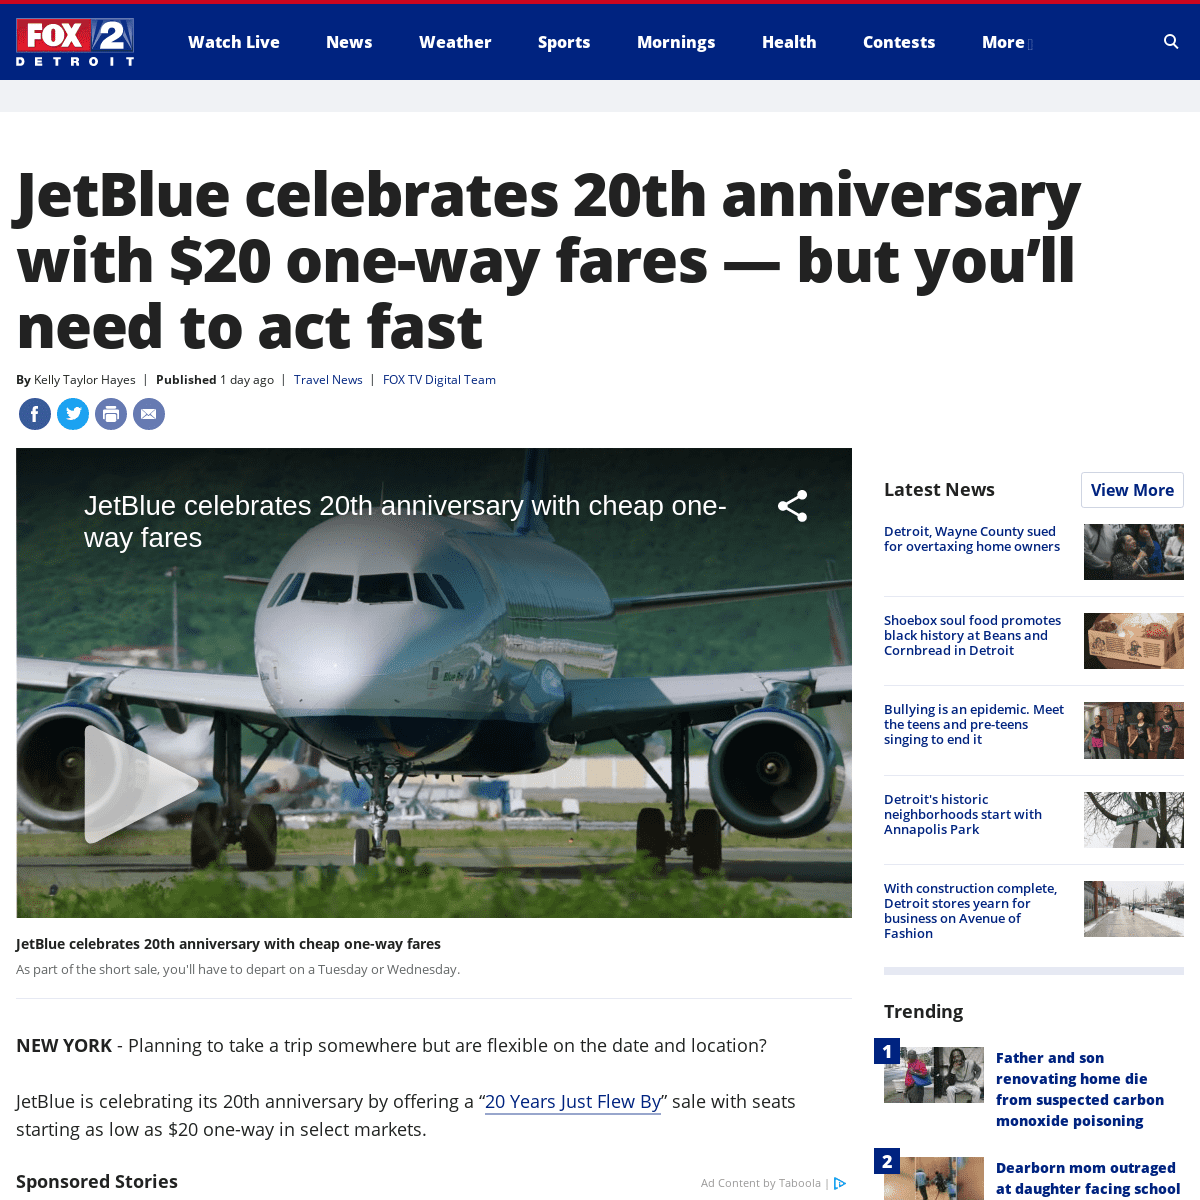 A complete backup of www.fox2detroit.com/news/jetblue-celebrates-20th-anniversary-with-20-one-way-fares-but-youll-need-to-act-fa